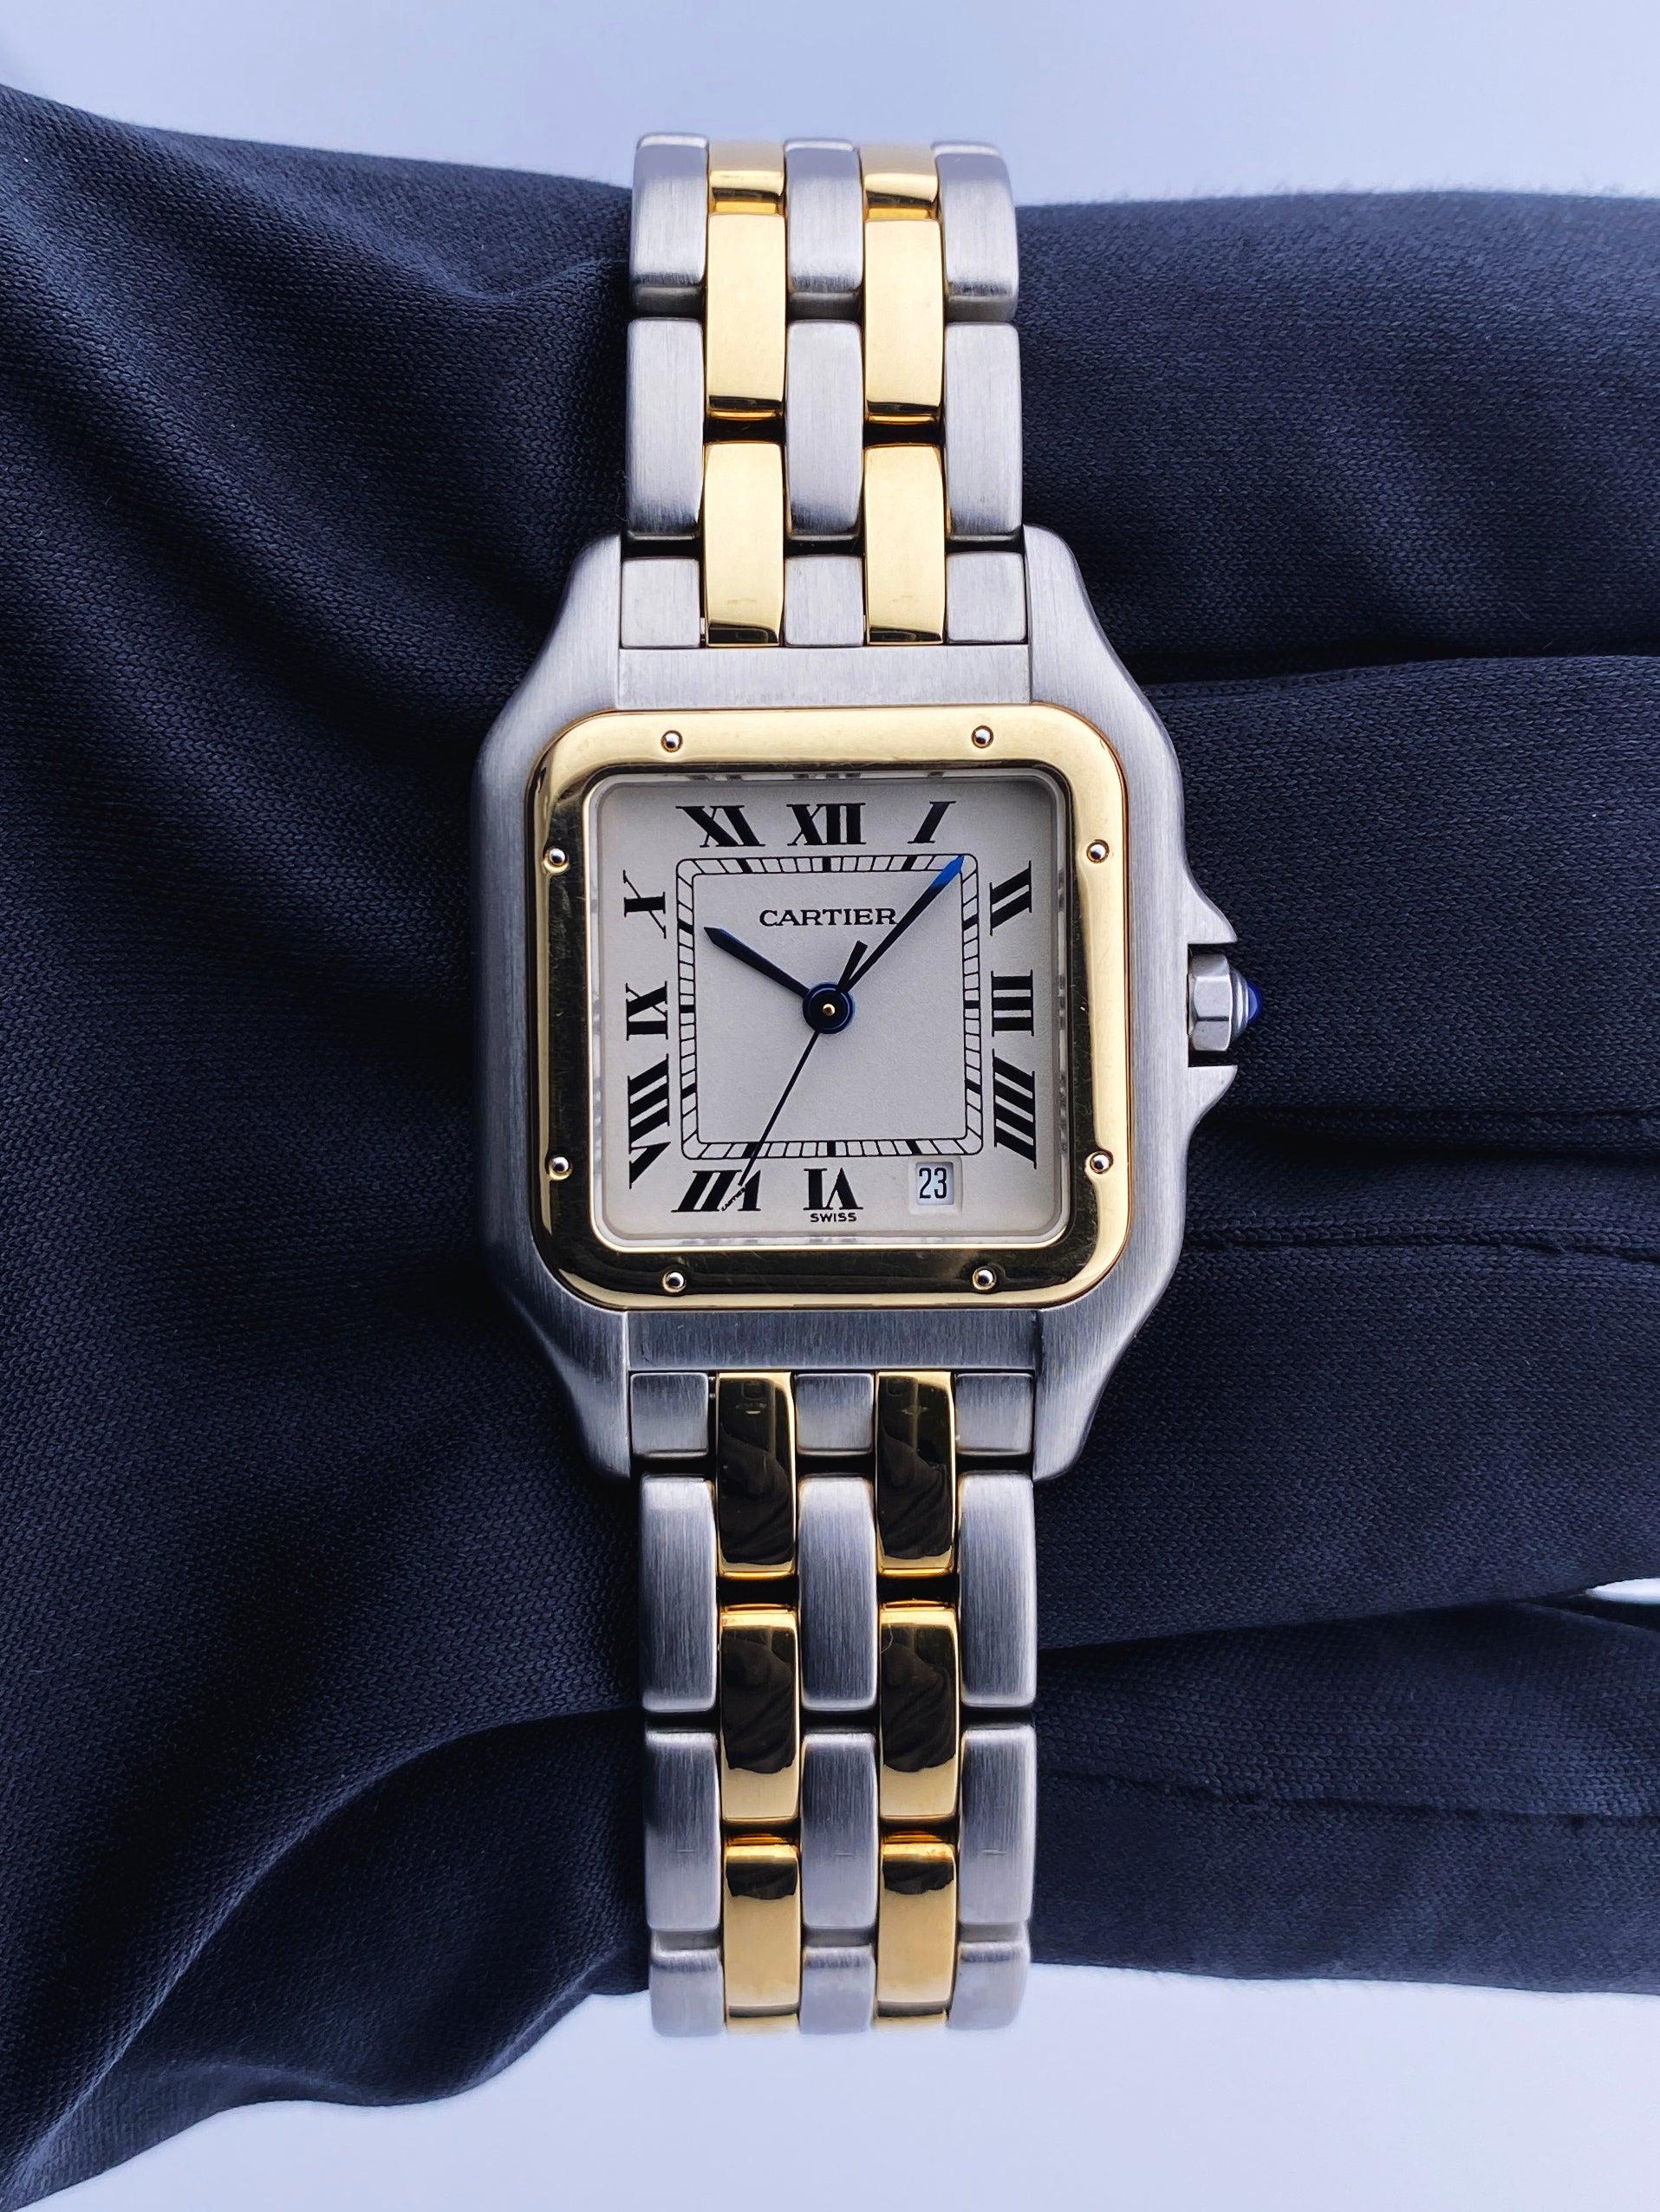 Cartier Panthere 1100 Midsize Ladies Watch. 27mm stainless steel case with a 18K yellow gold bezel. Off-White dial with blue steel hands and black Roman numerals hour markers. Date display at the 5 o'clock position. Two-tone stainless steel and 18K